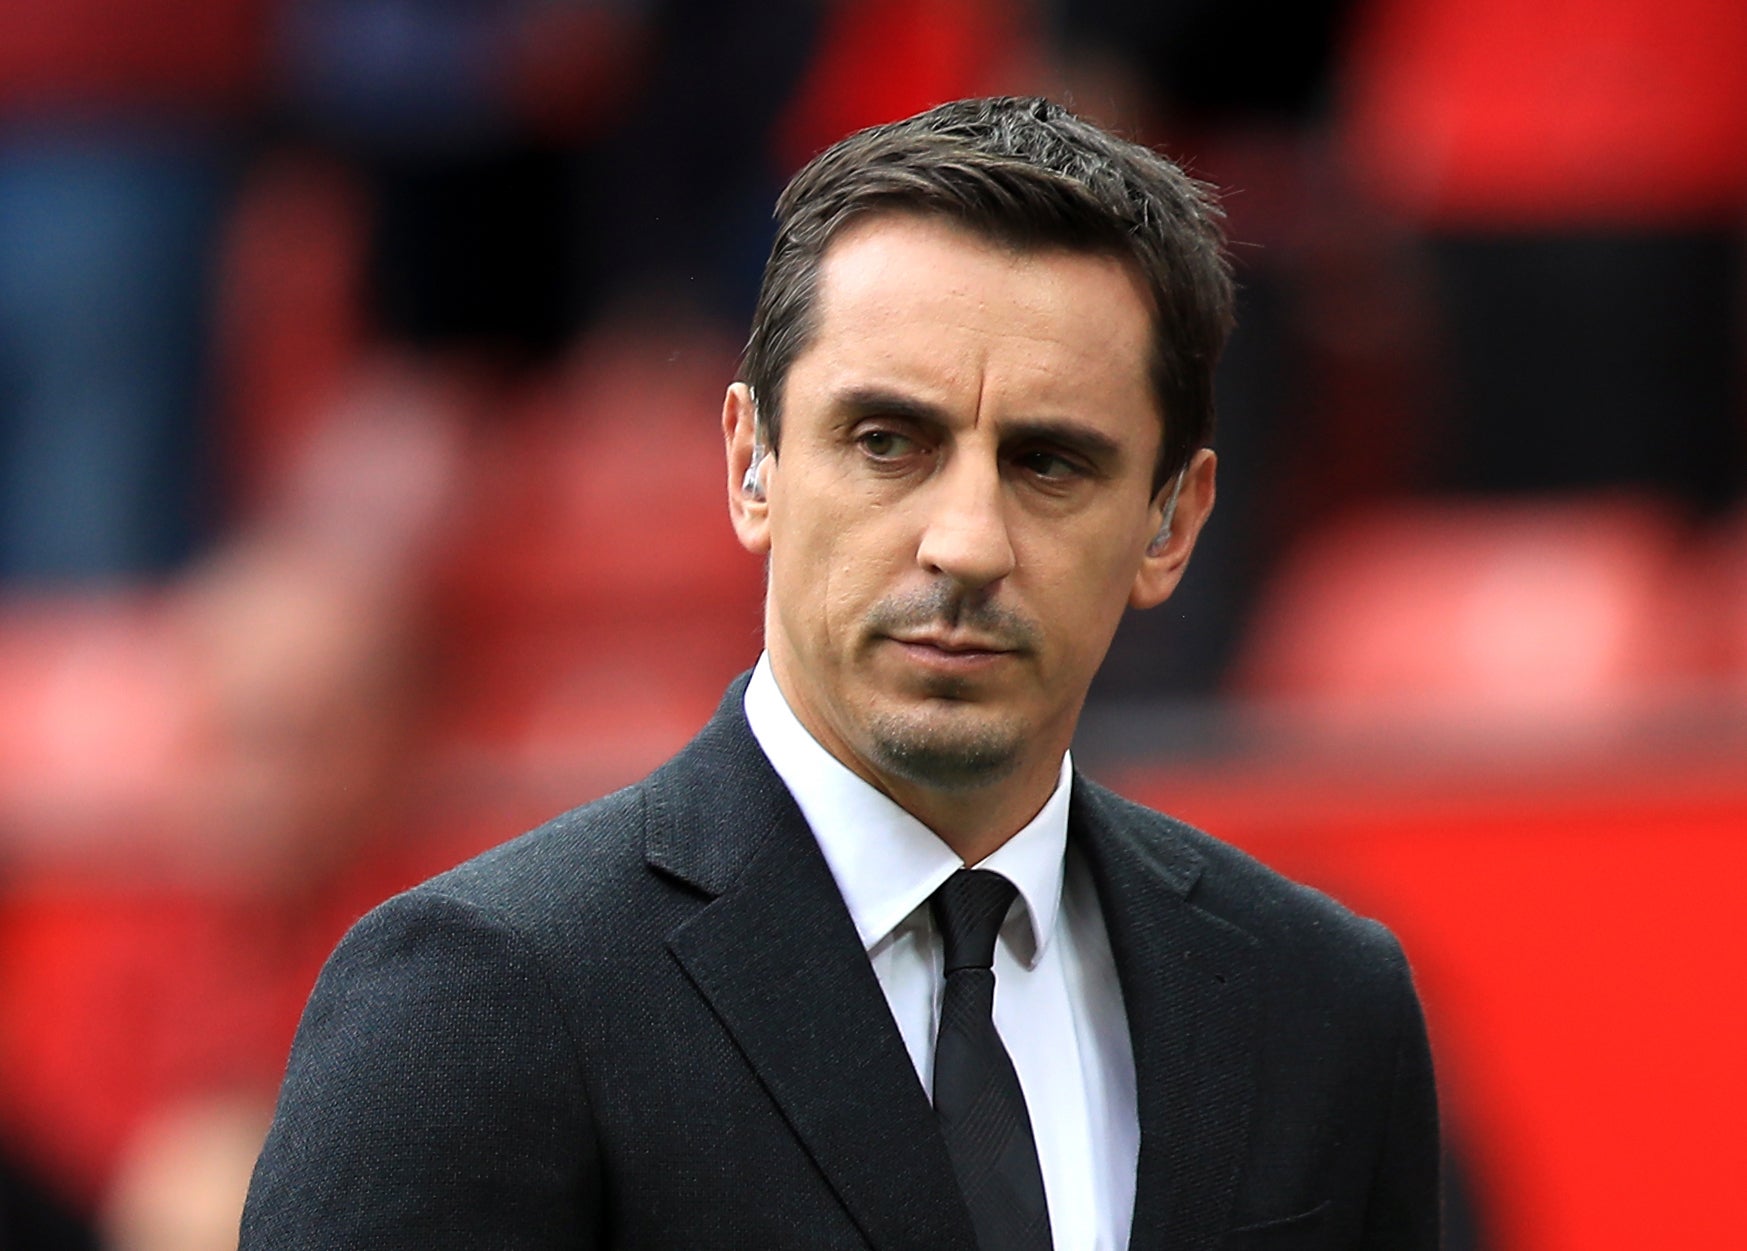 Gary Neville believes Manchester United’s ‘horrible’ performances this season shows they will not challenge for the title